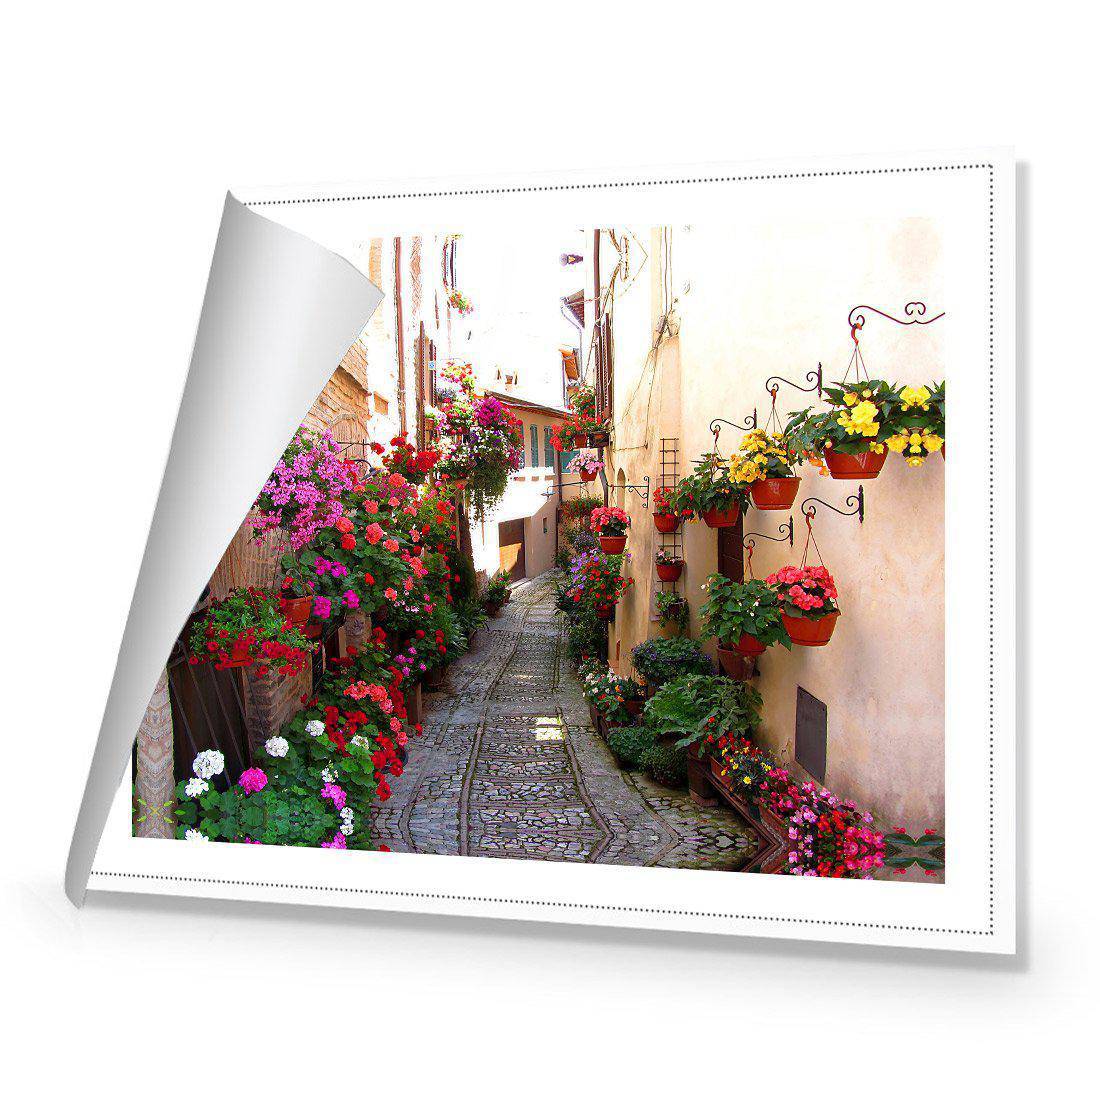 Floral Alley In Italy Canvas Art-Canvas-Wall Art Designs-45x30cm-Rolled Canvas-Wall Art Designs